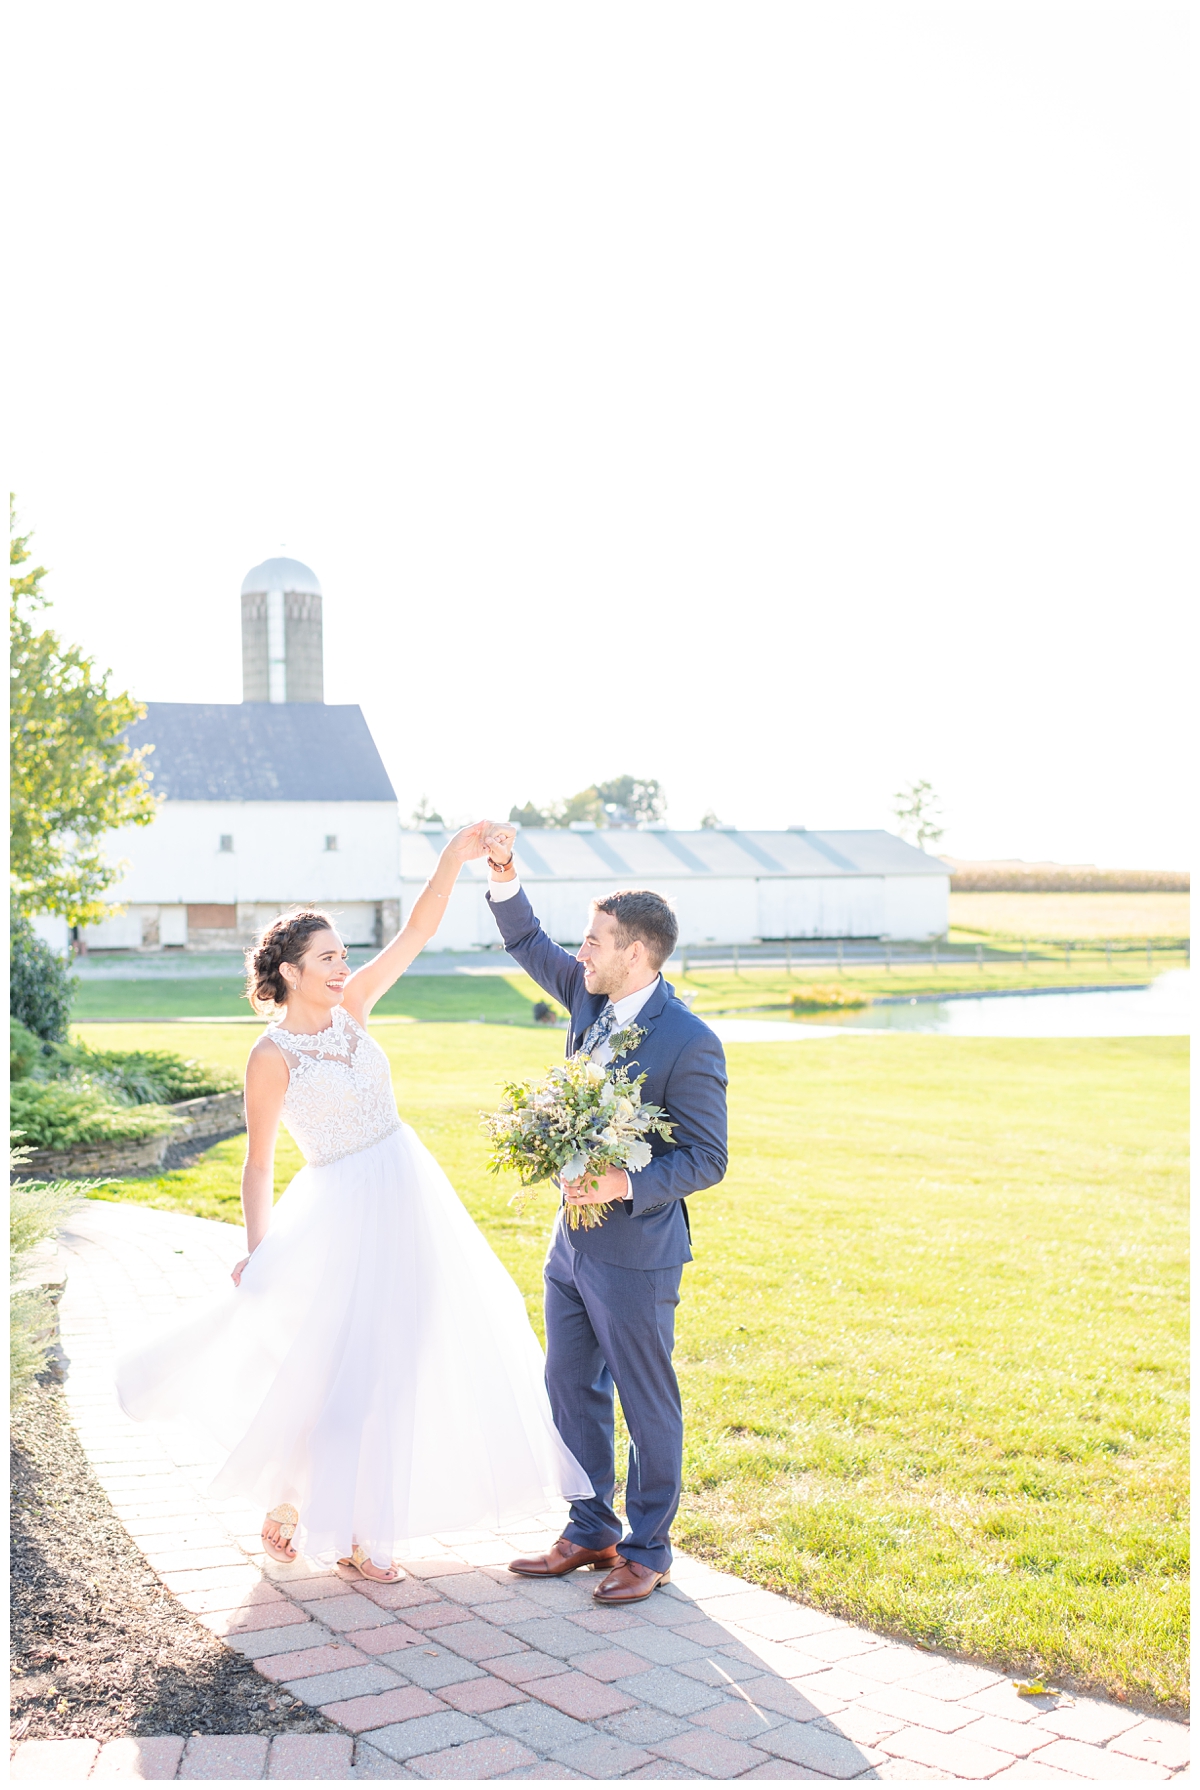 Light and romantic wedding photographer in Lancaster, PA